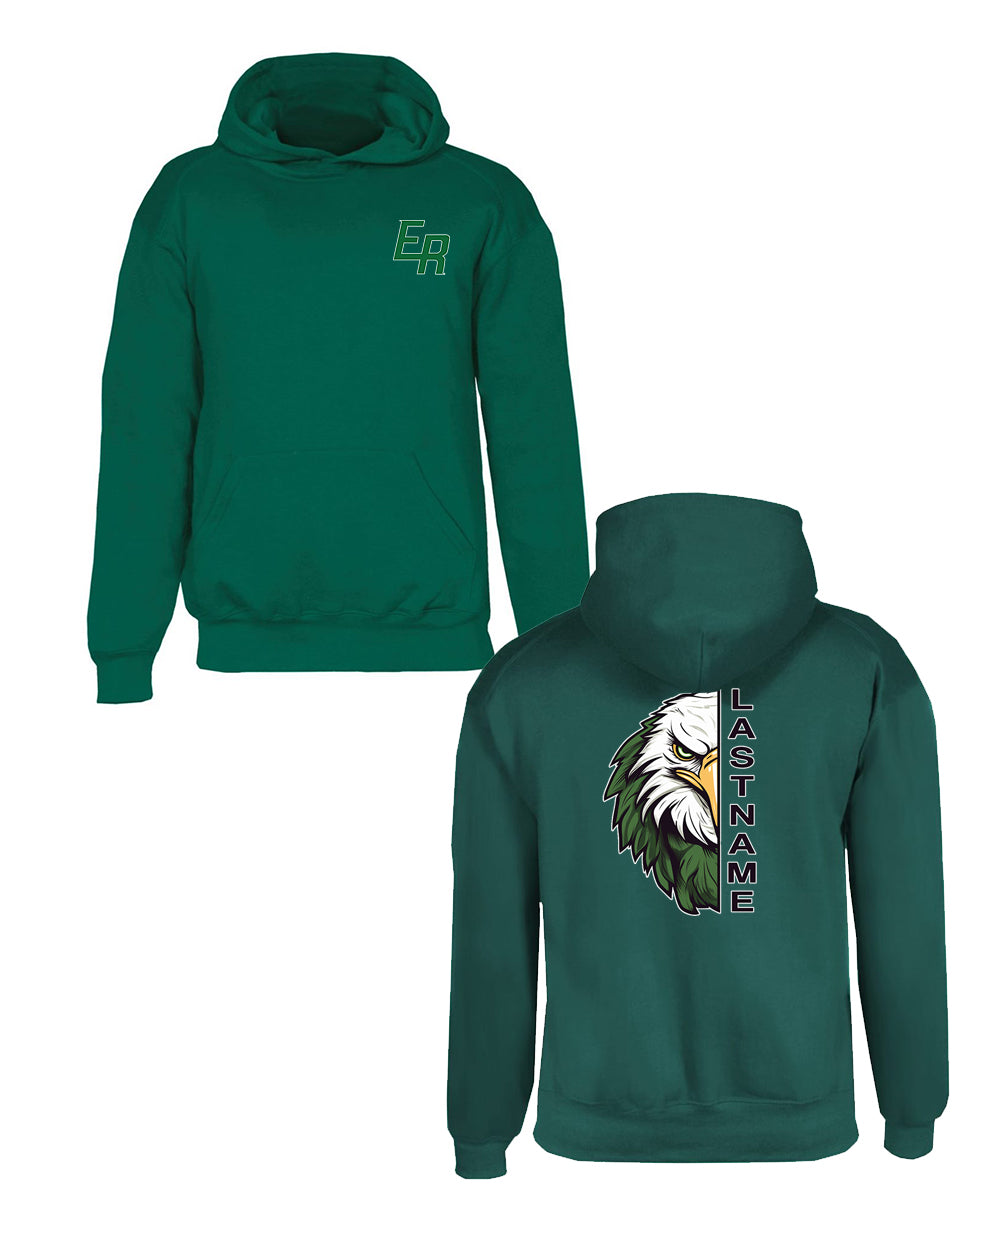 Ramblers CUSTOM NAME Youth Hooded Sweatshirt - 2254 (color options available)